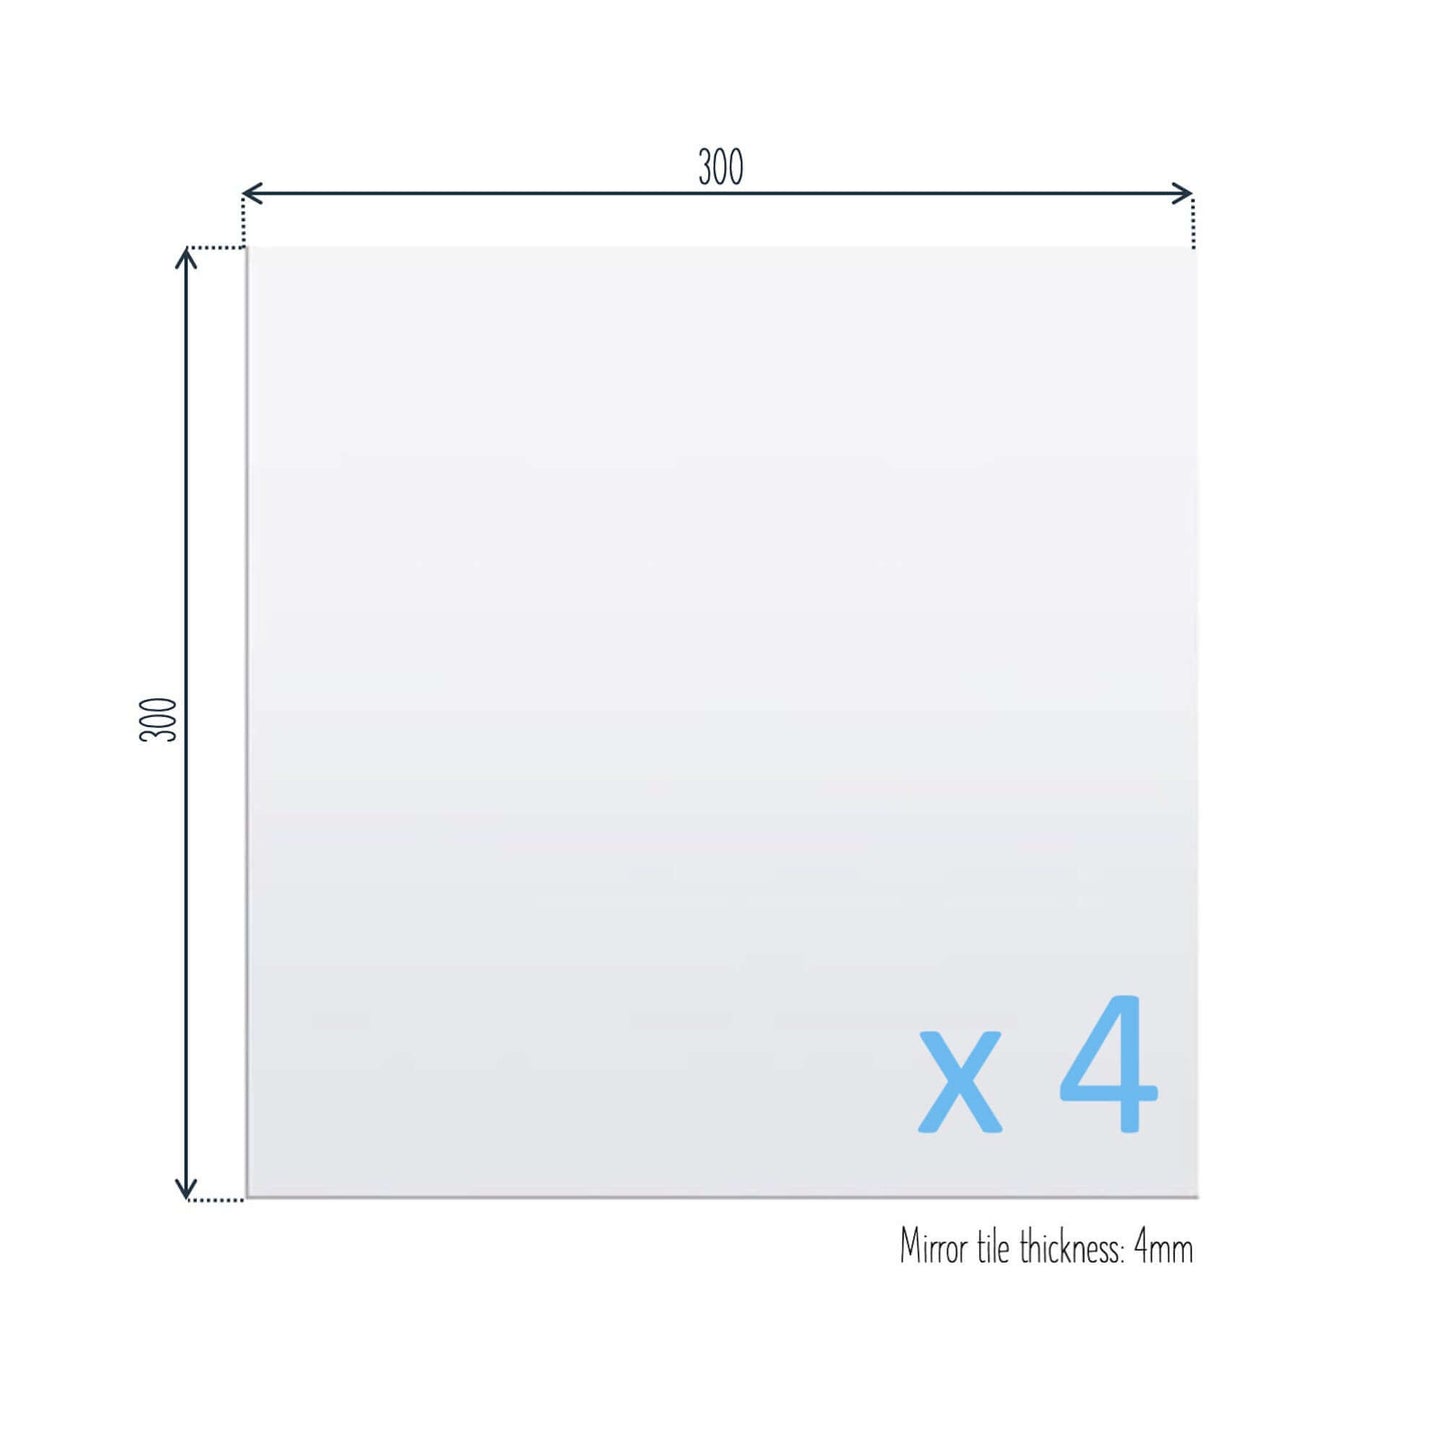 Kendall Self-Adhesive Silver Glass Mirror Tiles, Use as Full length Mirror or Create your own Shape, Set of 4 Square Silver Mirrored Tiles, 300 x 300mm per tile - Accessories